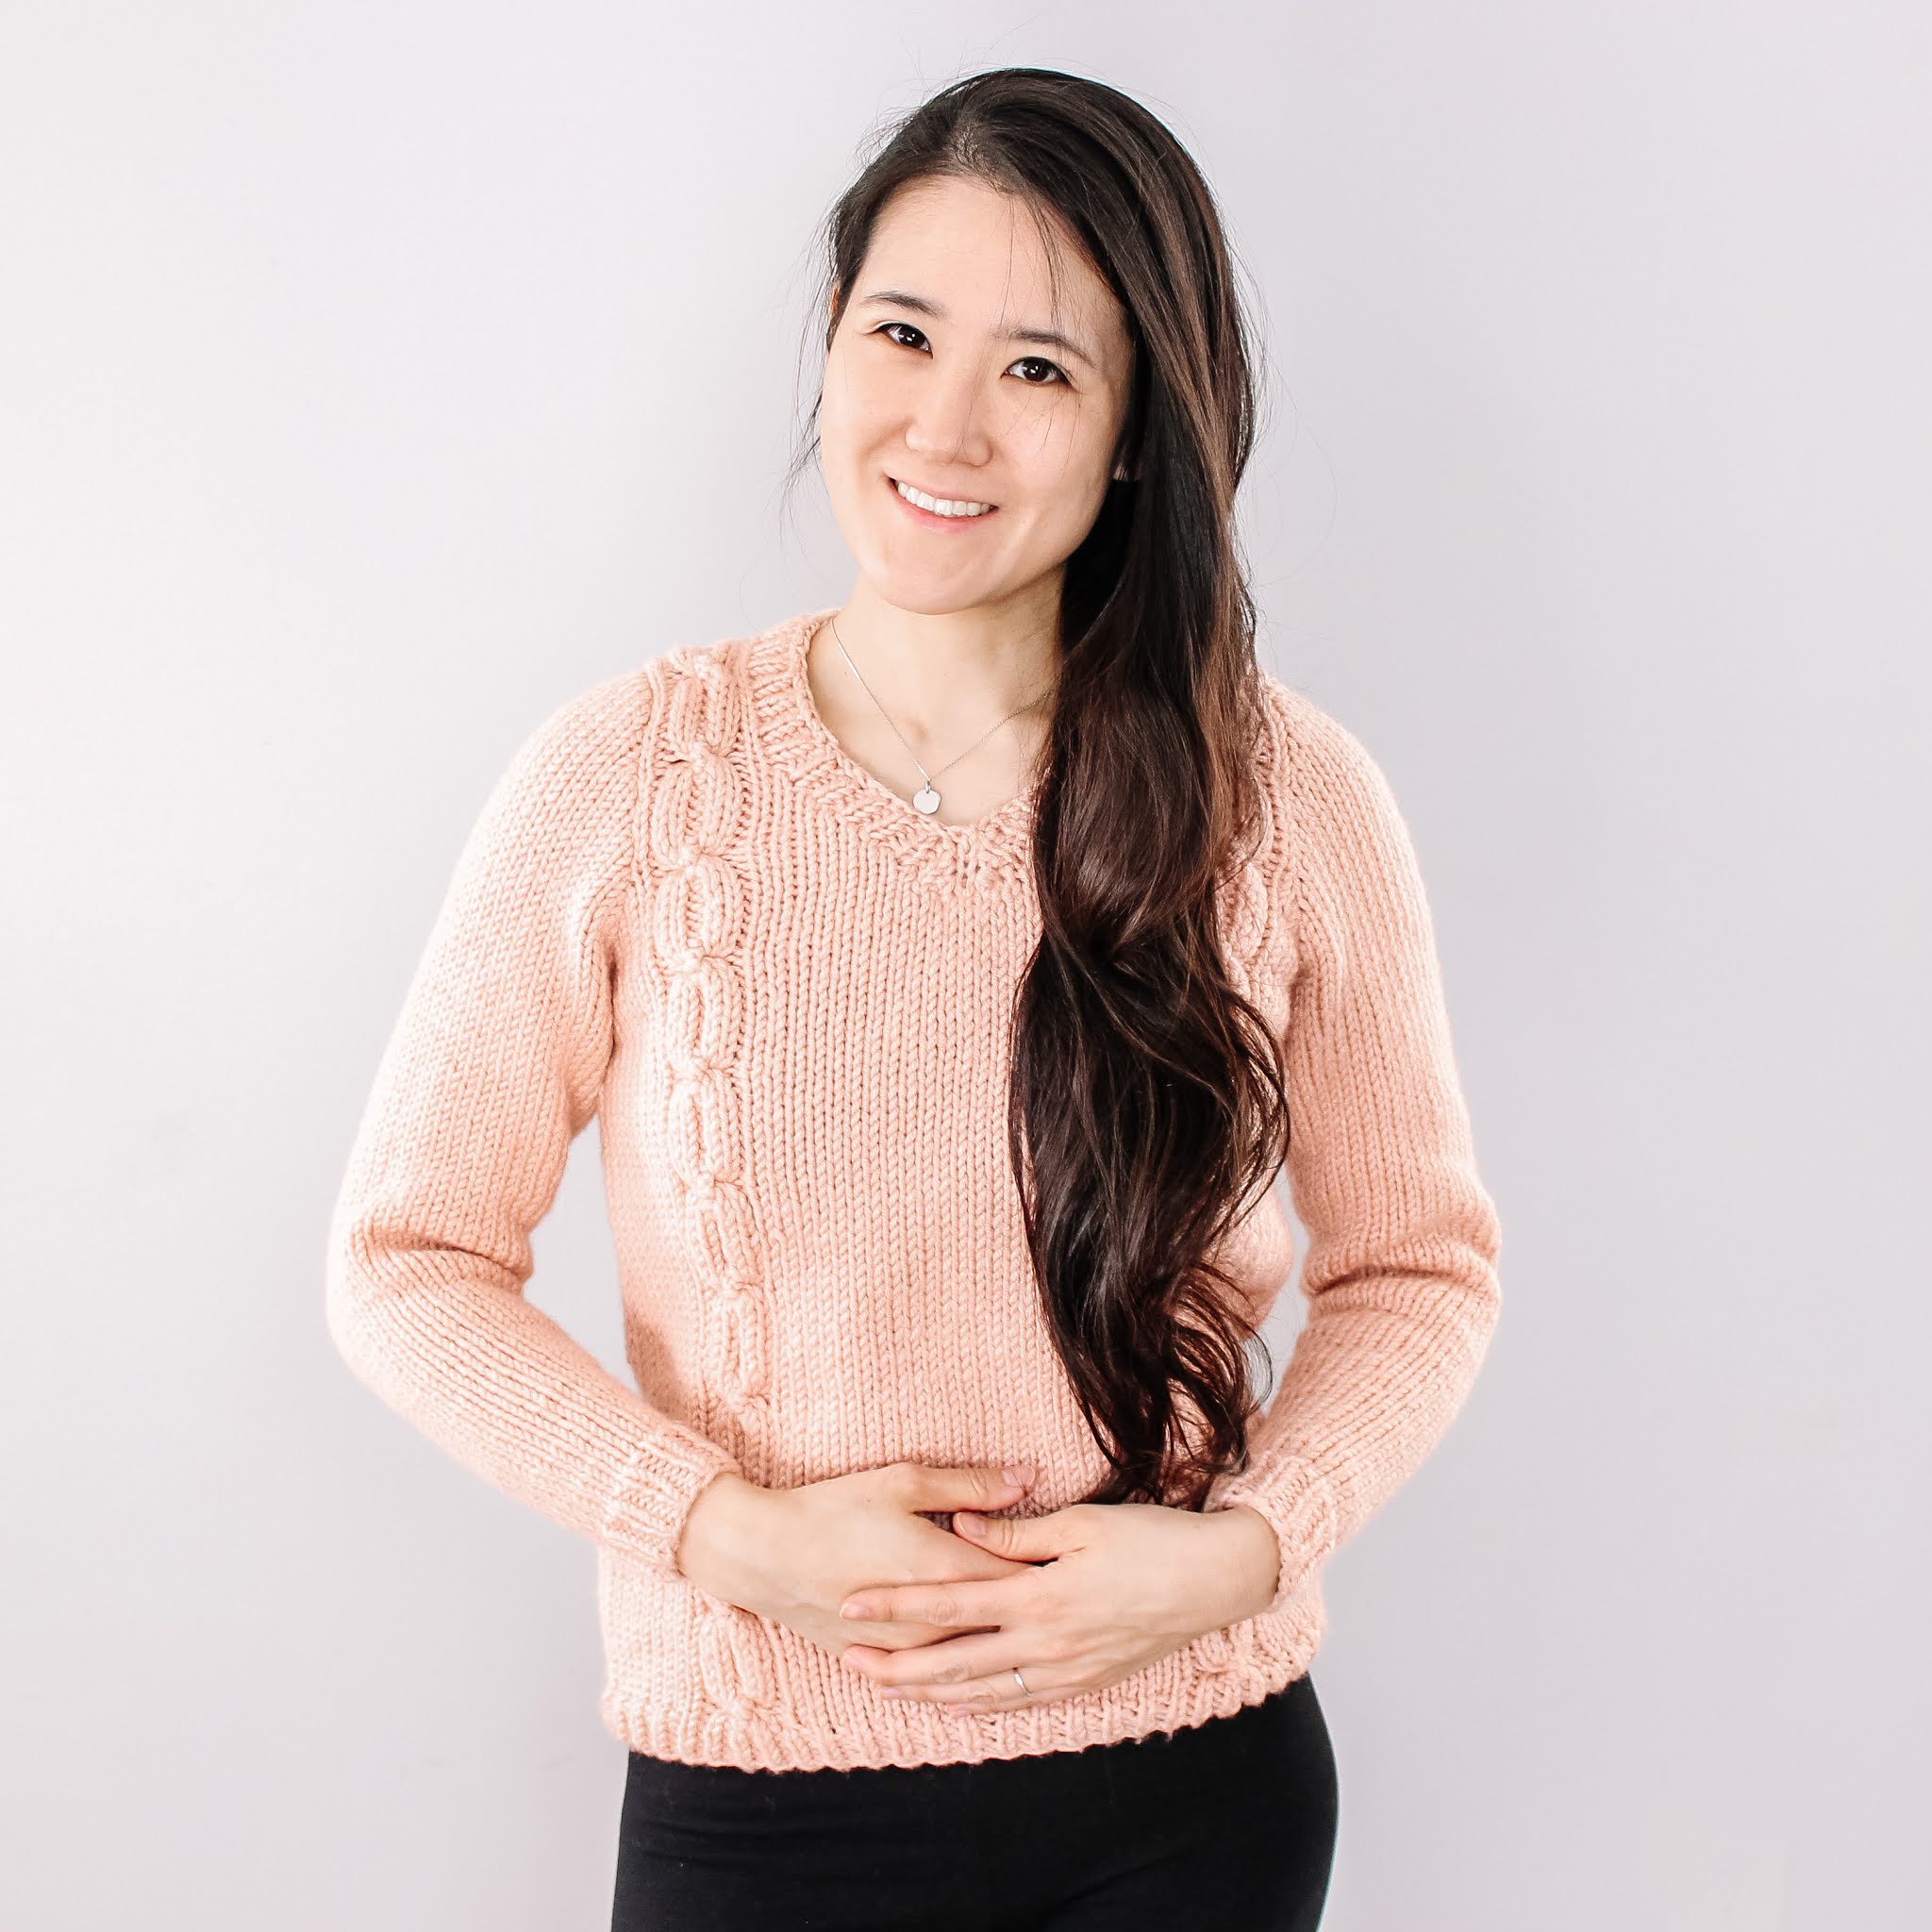 Modesty by Laura designer wearing a knit Briar Rose Pullover.